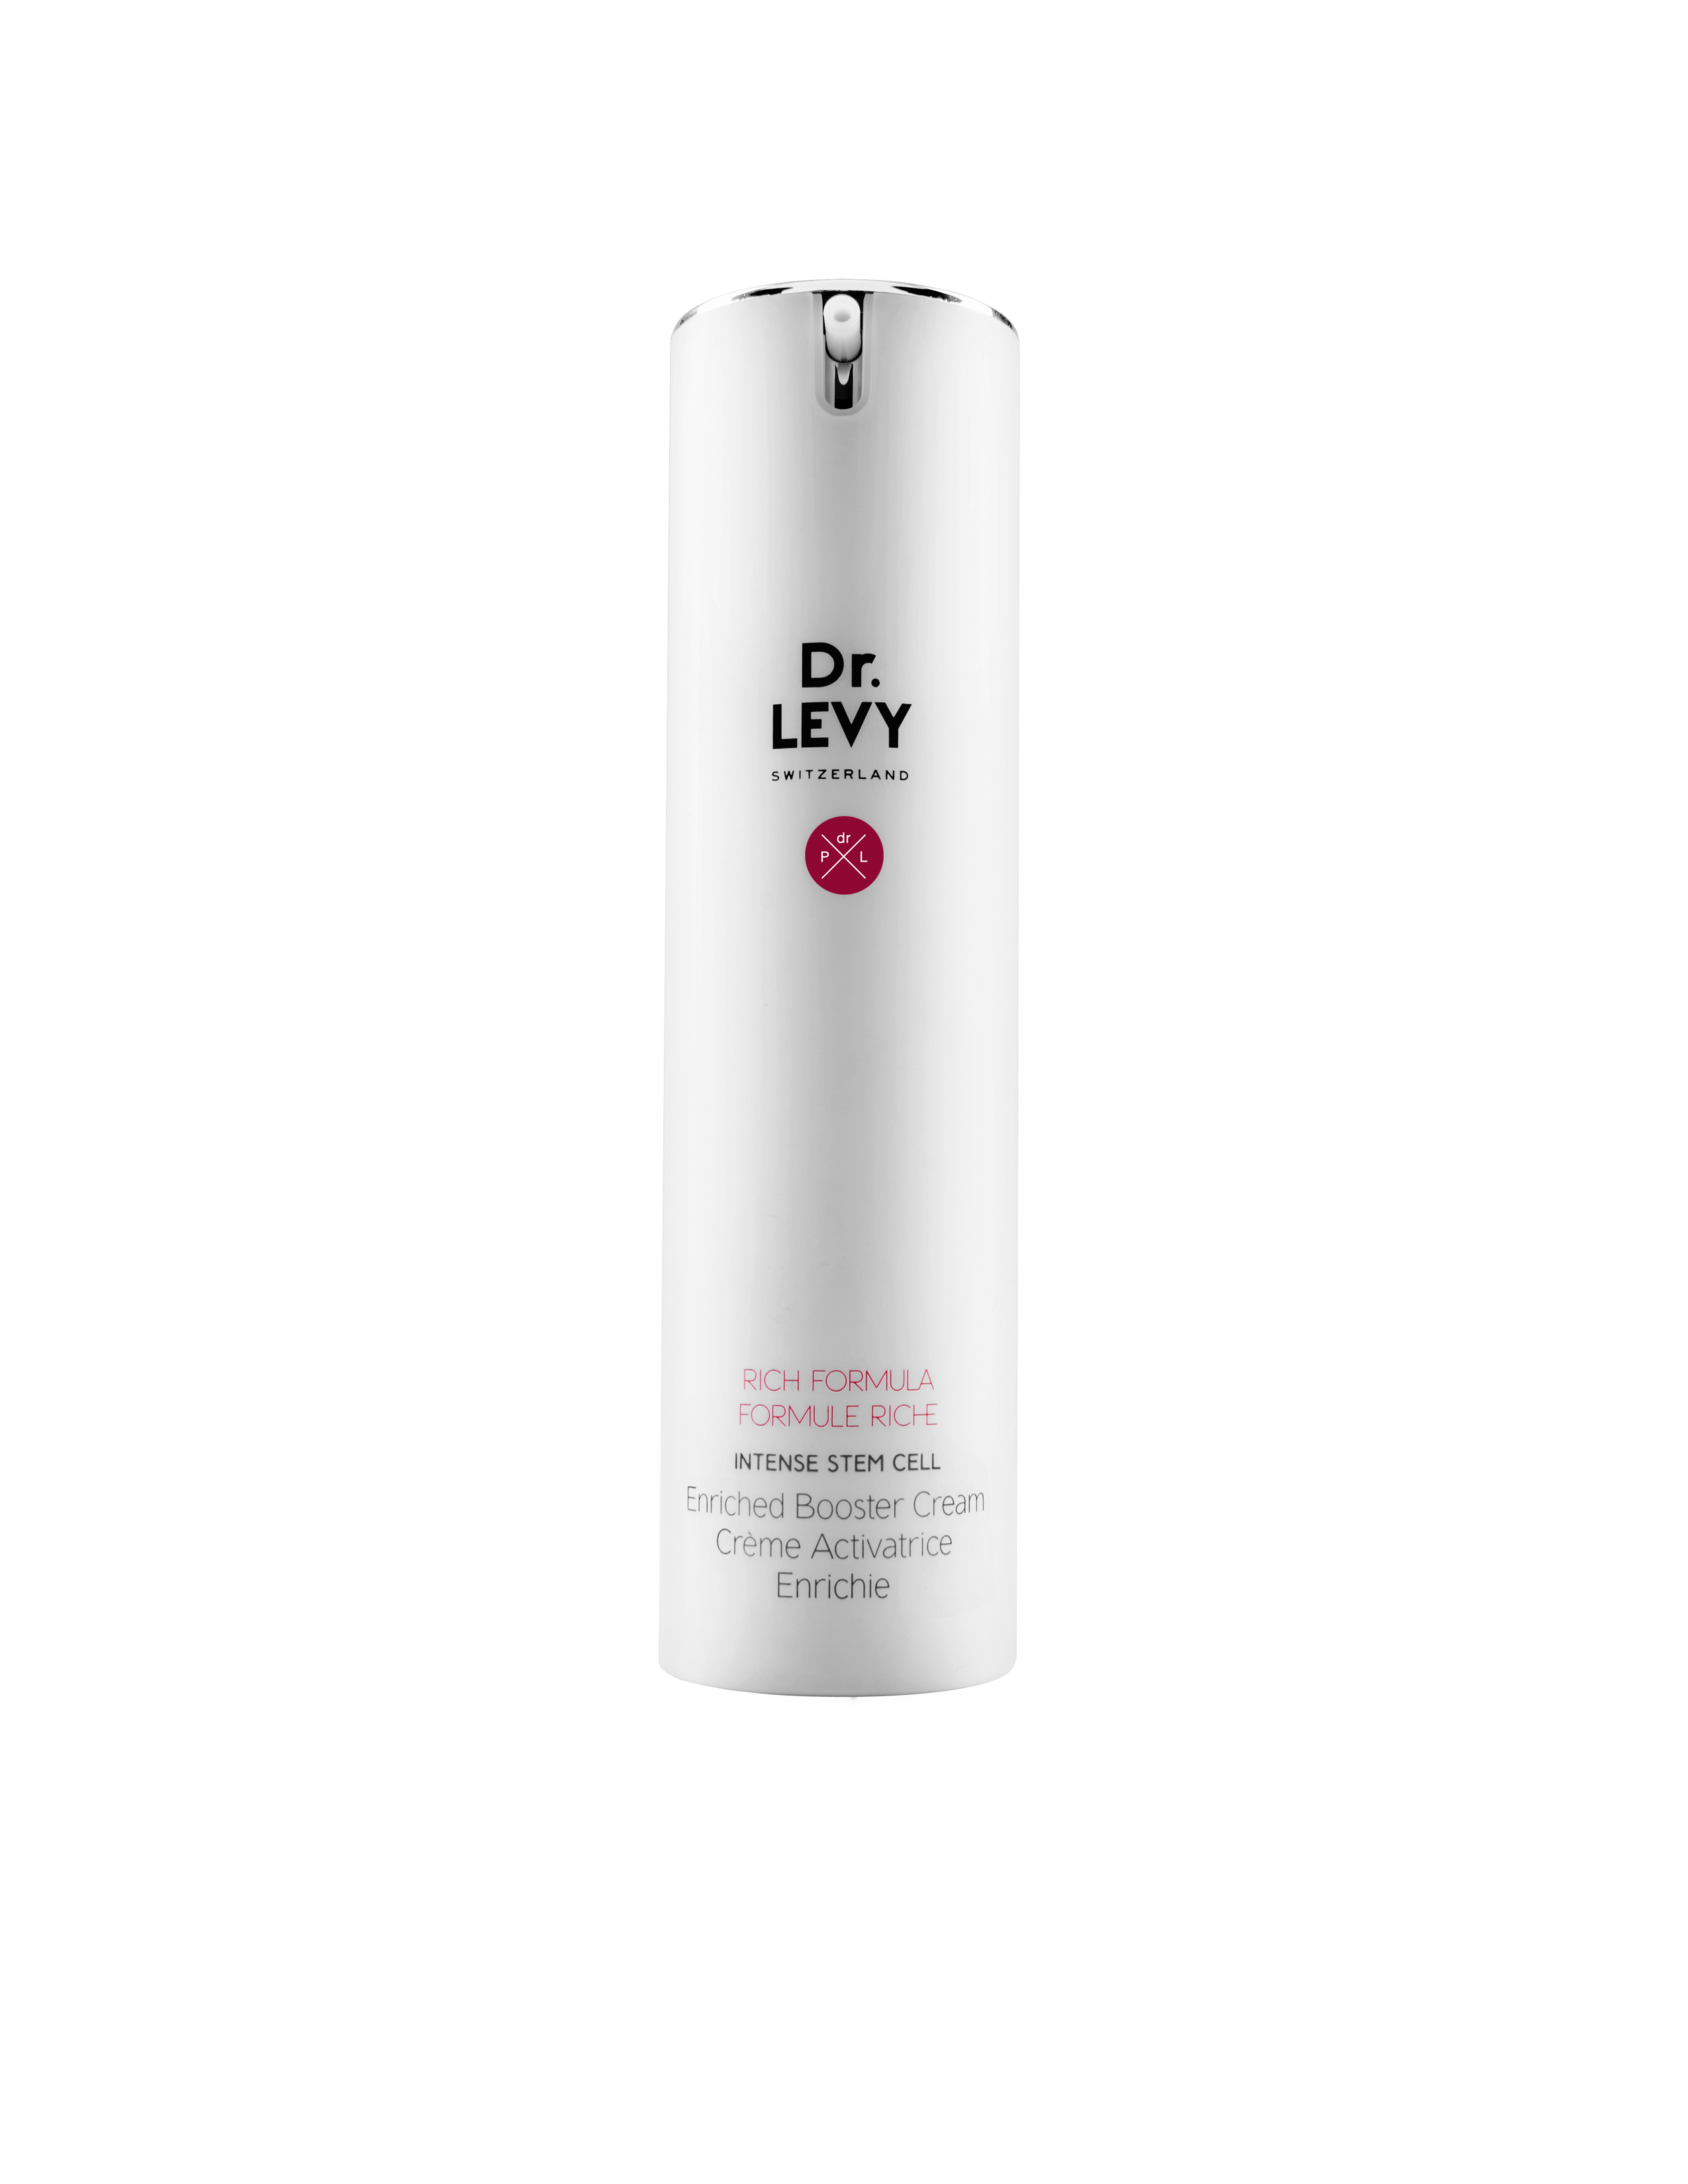 Dr. LEVY | Enriched Booster Cream (50ml)